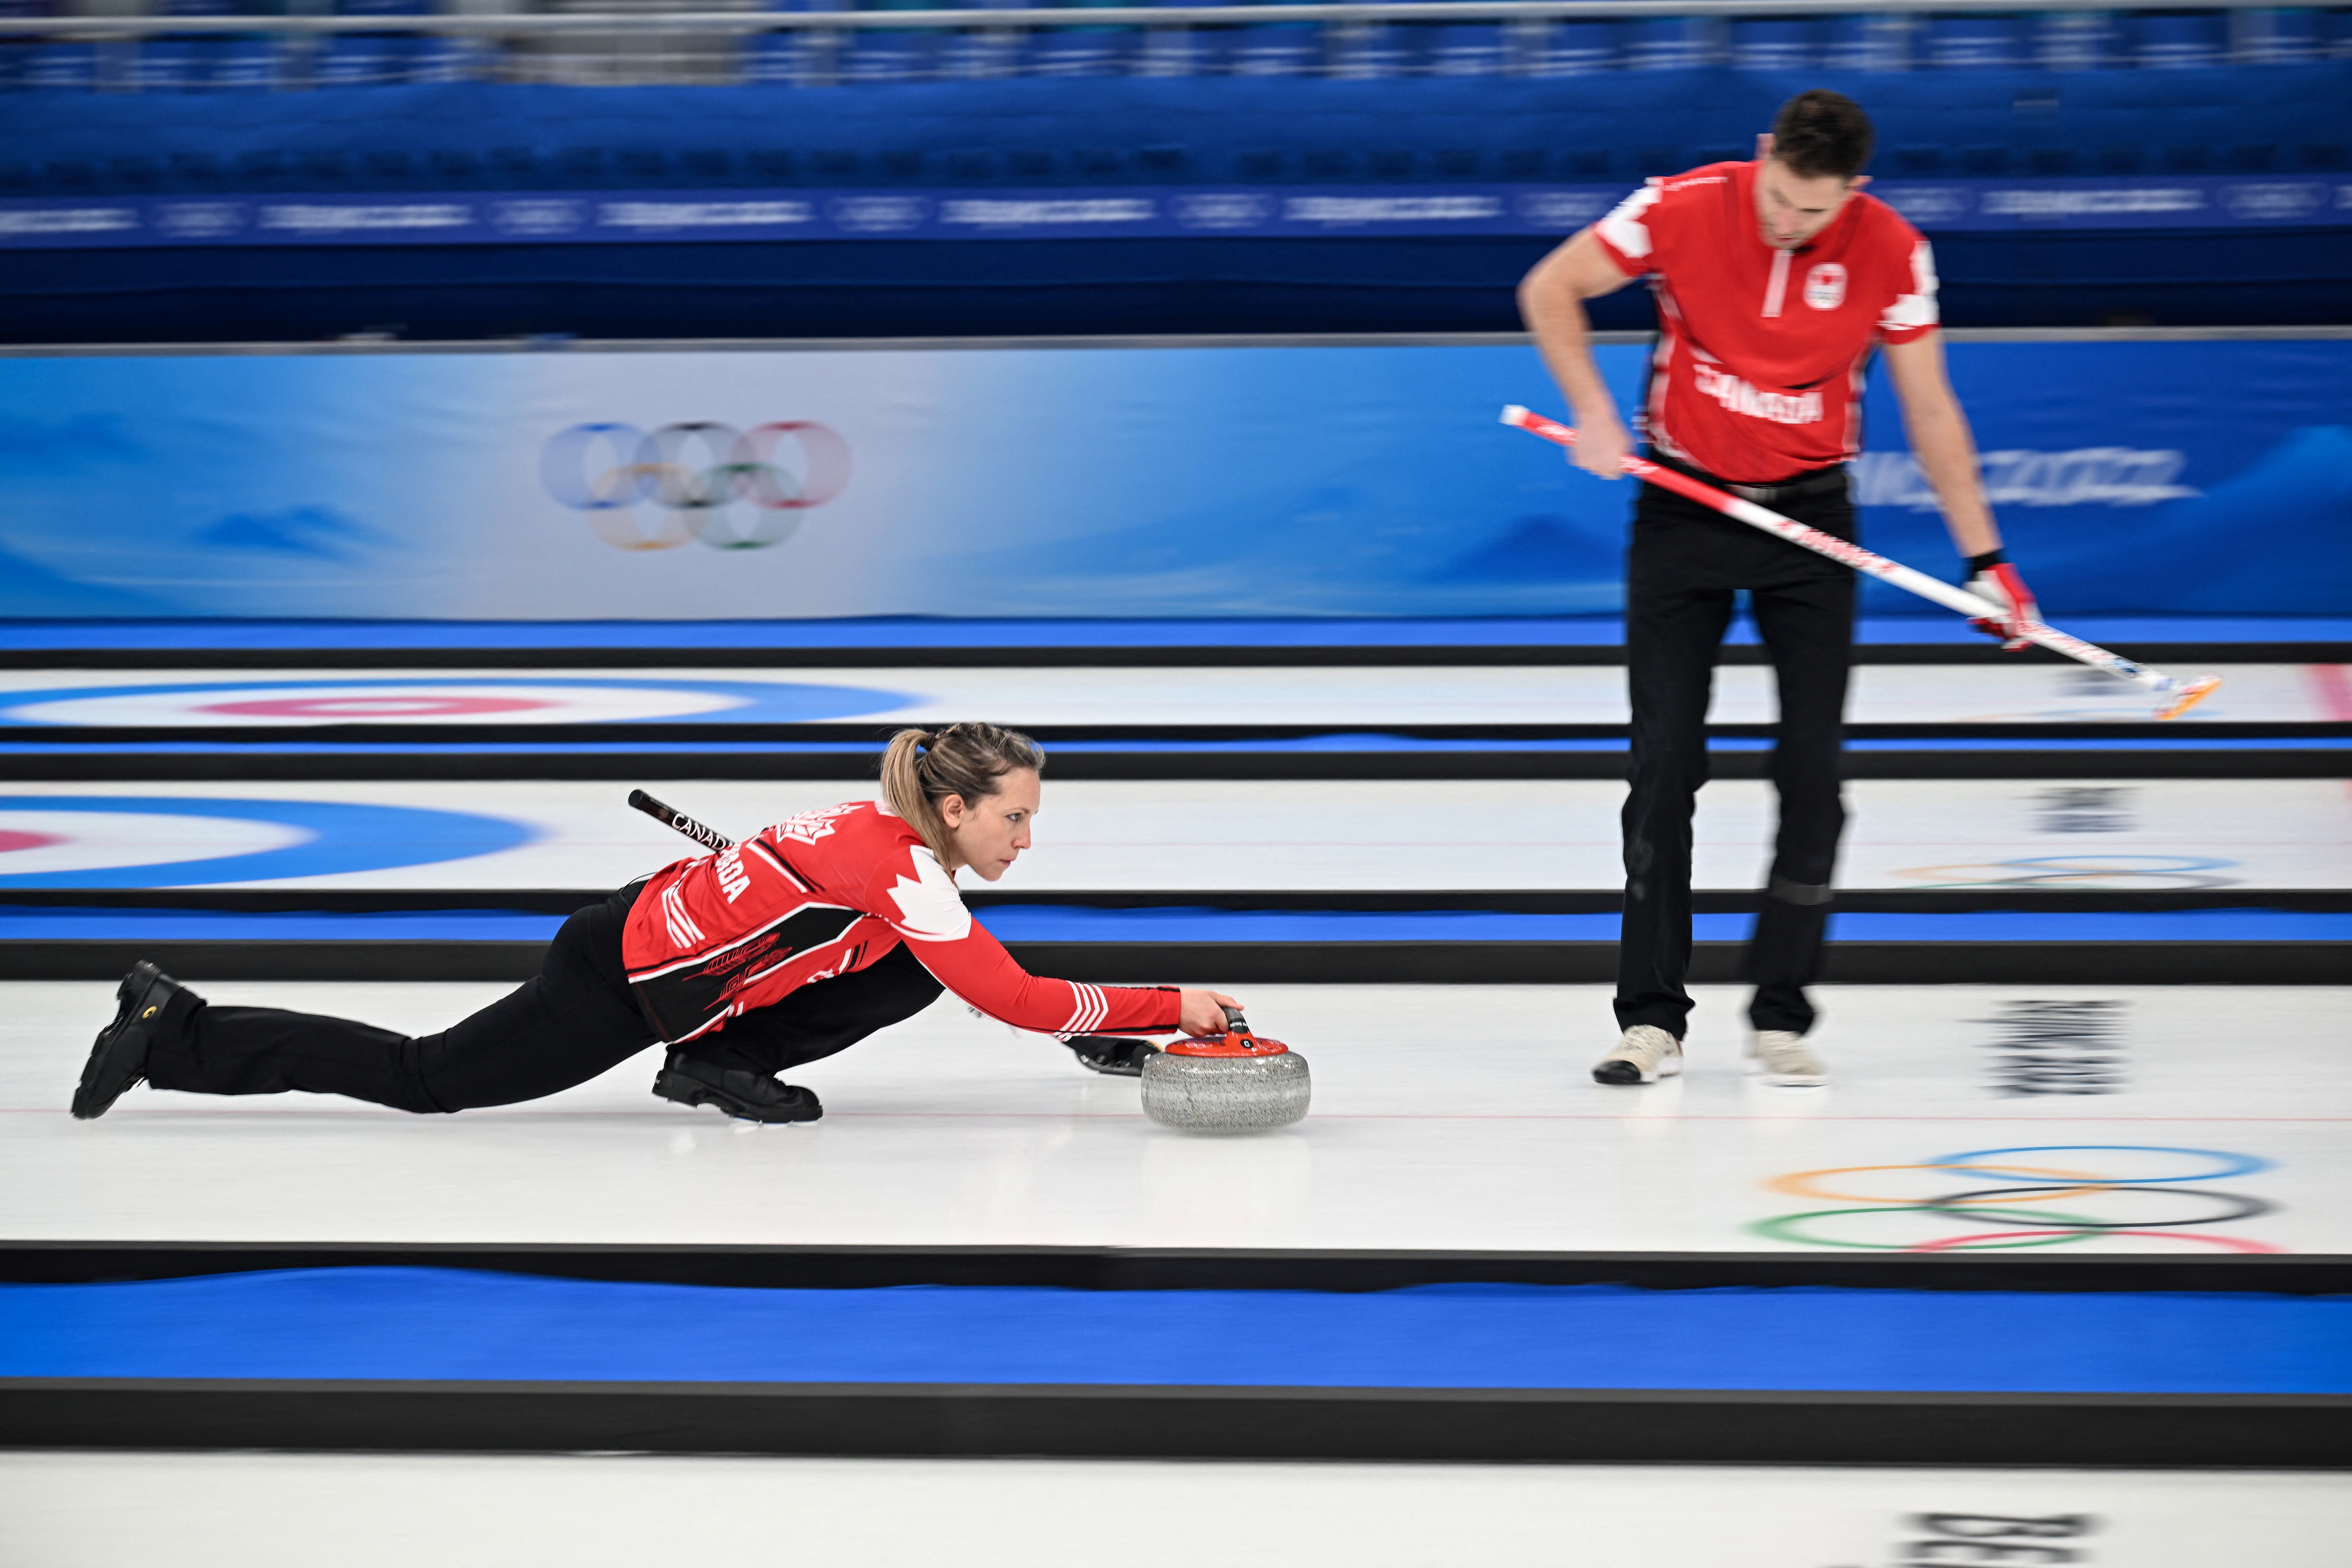 Canada's Rachel Homan (L) curls the stone during the mixed doubles round robin session 5 game of the Beijing 2022 Winter Olympic Games curling game against Switzerland February 4